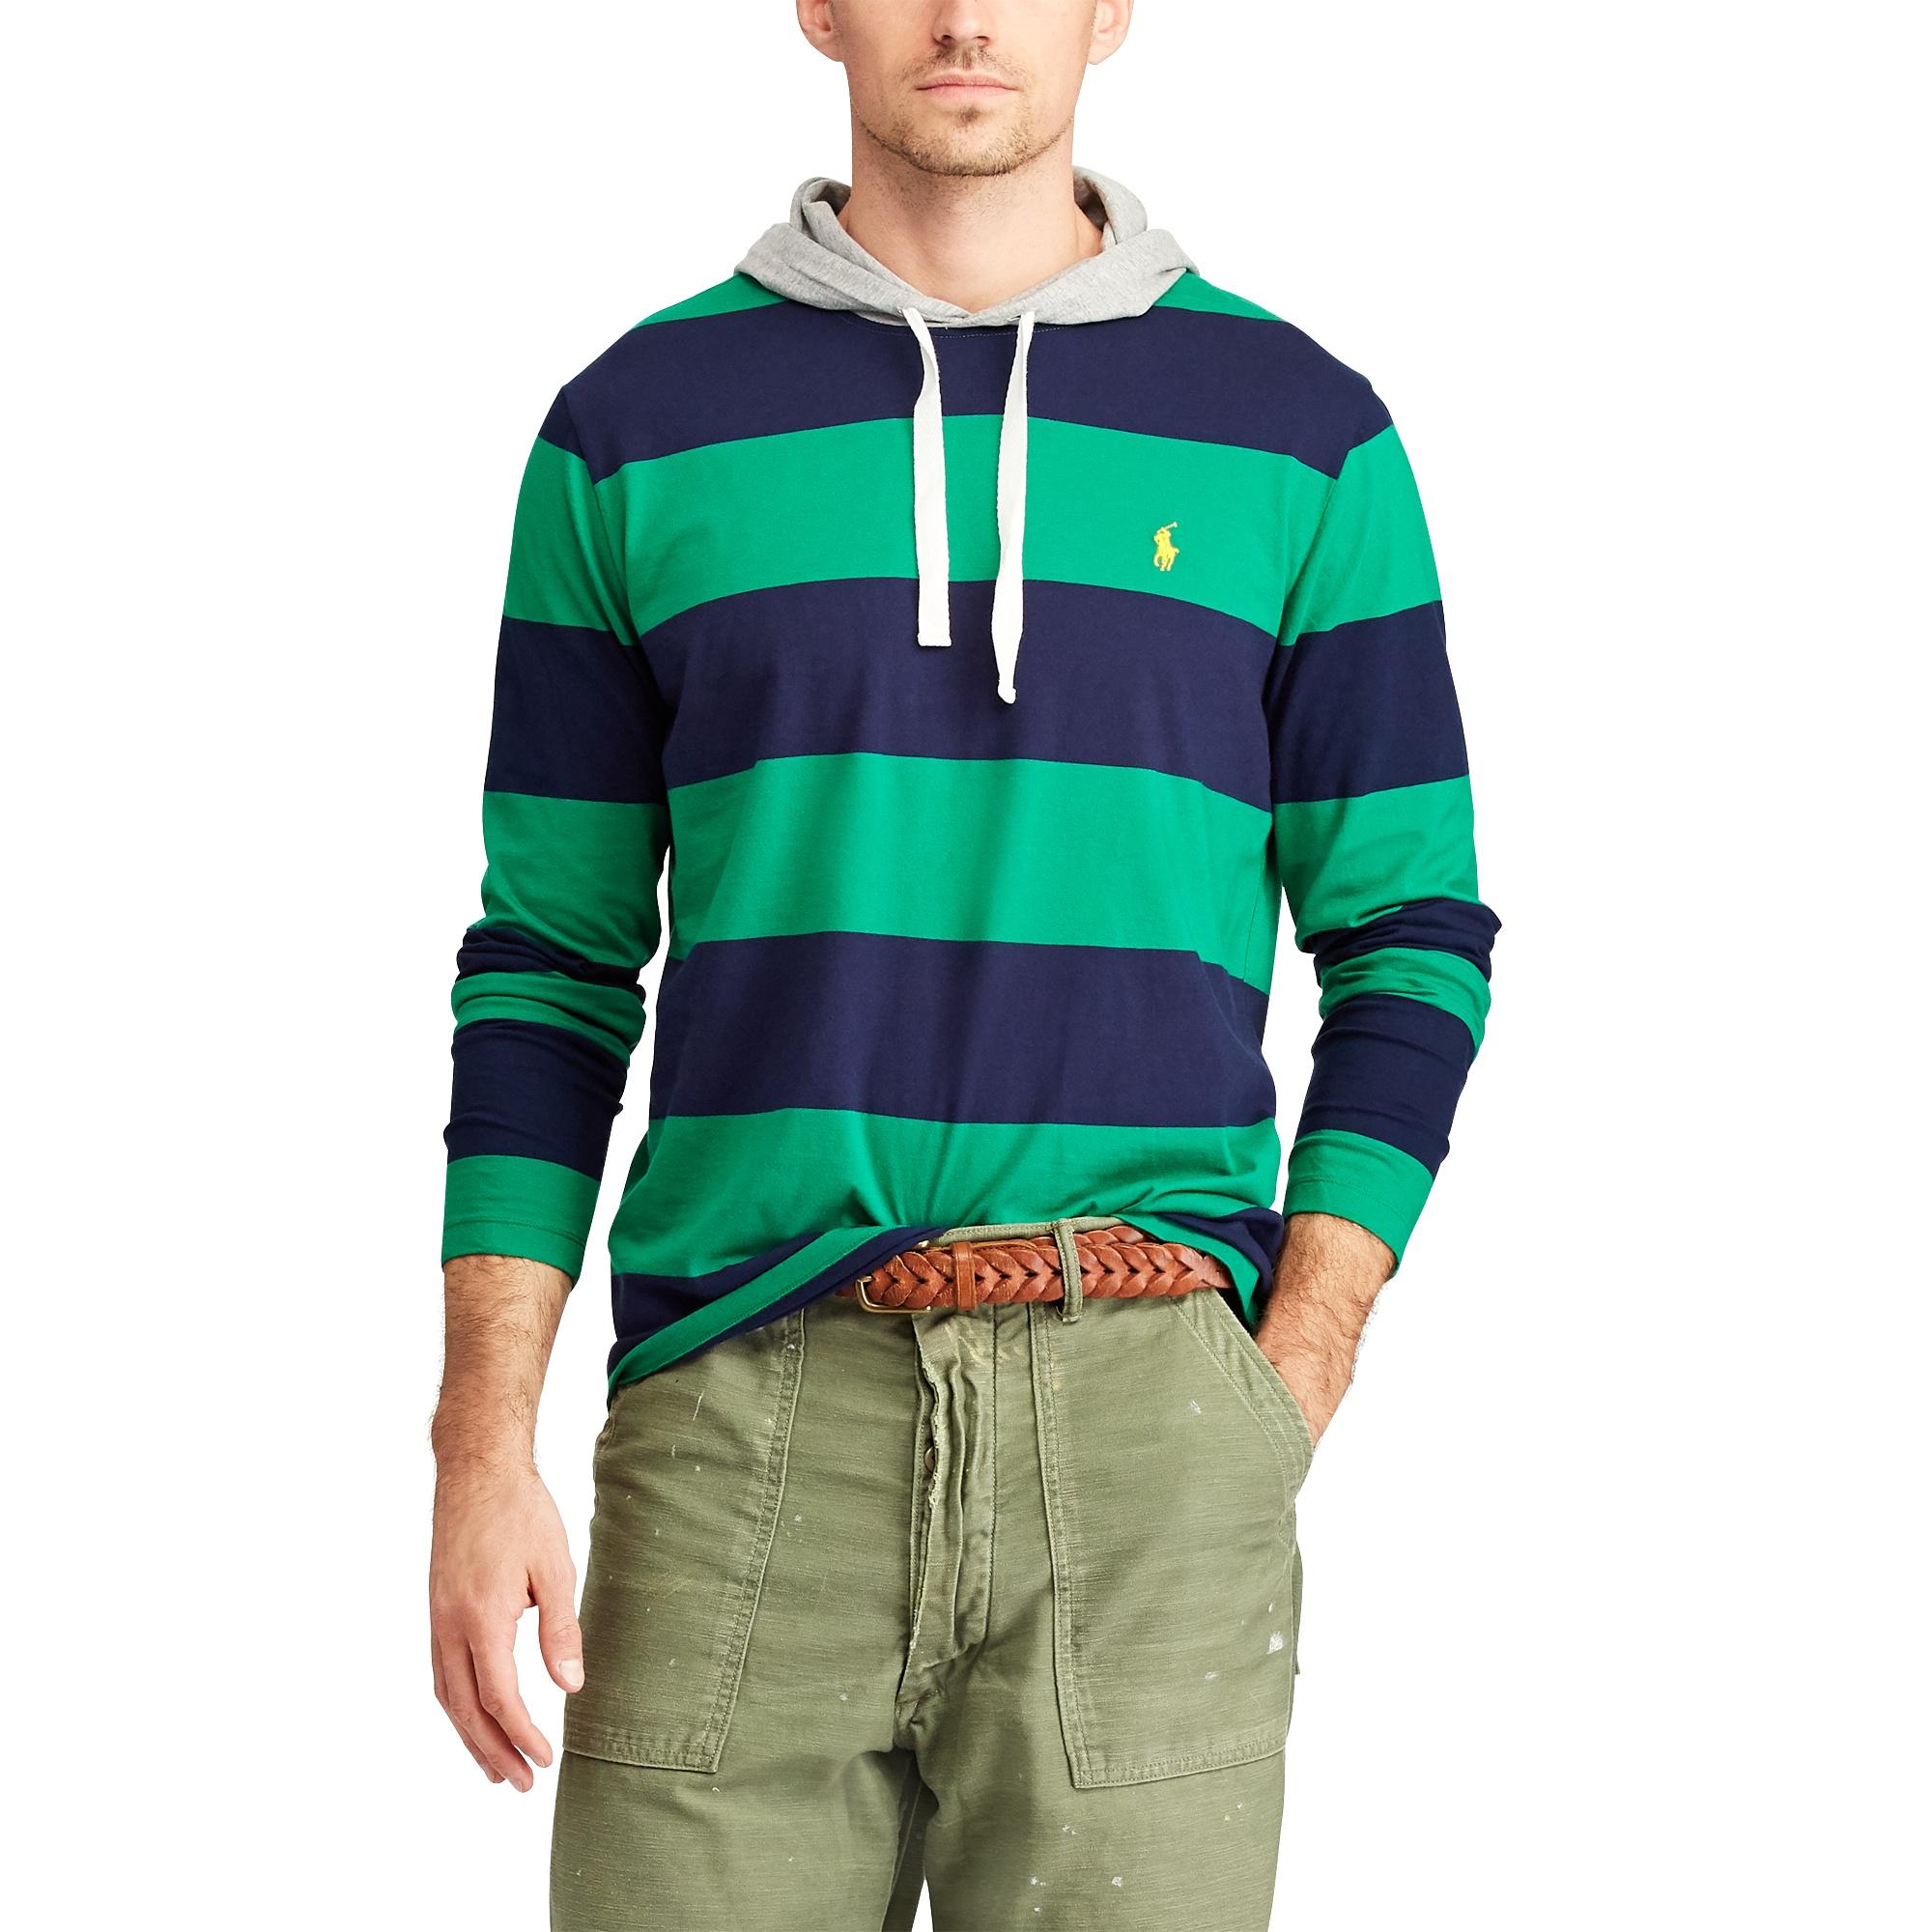 Polo Ralph Lauren Striped Cotton Hooded T-shirt in Green for Men - Lyst